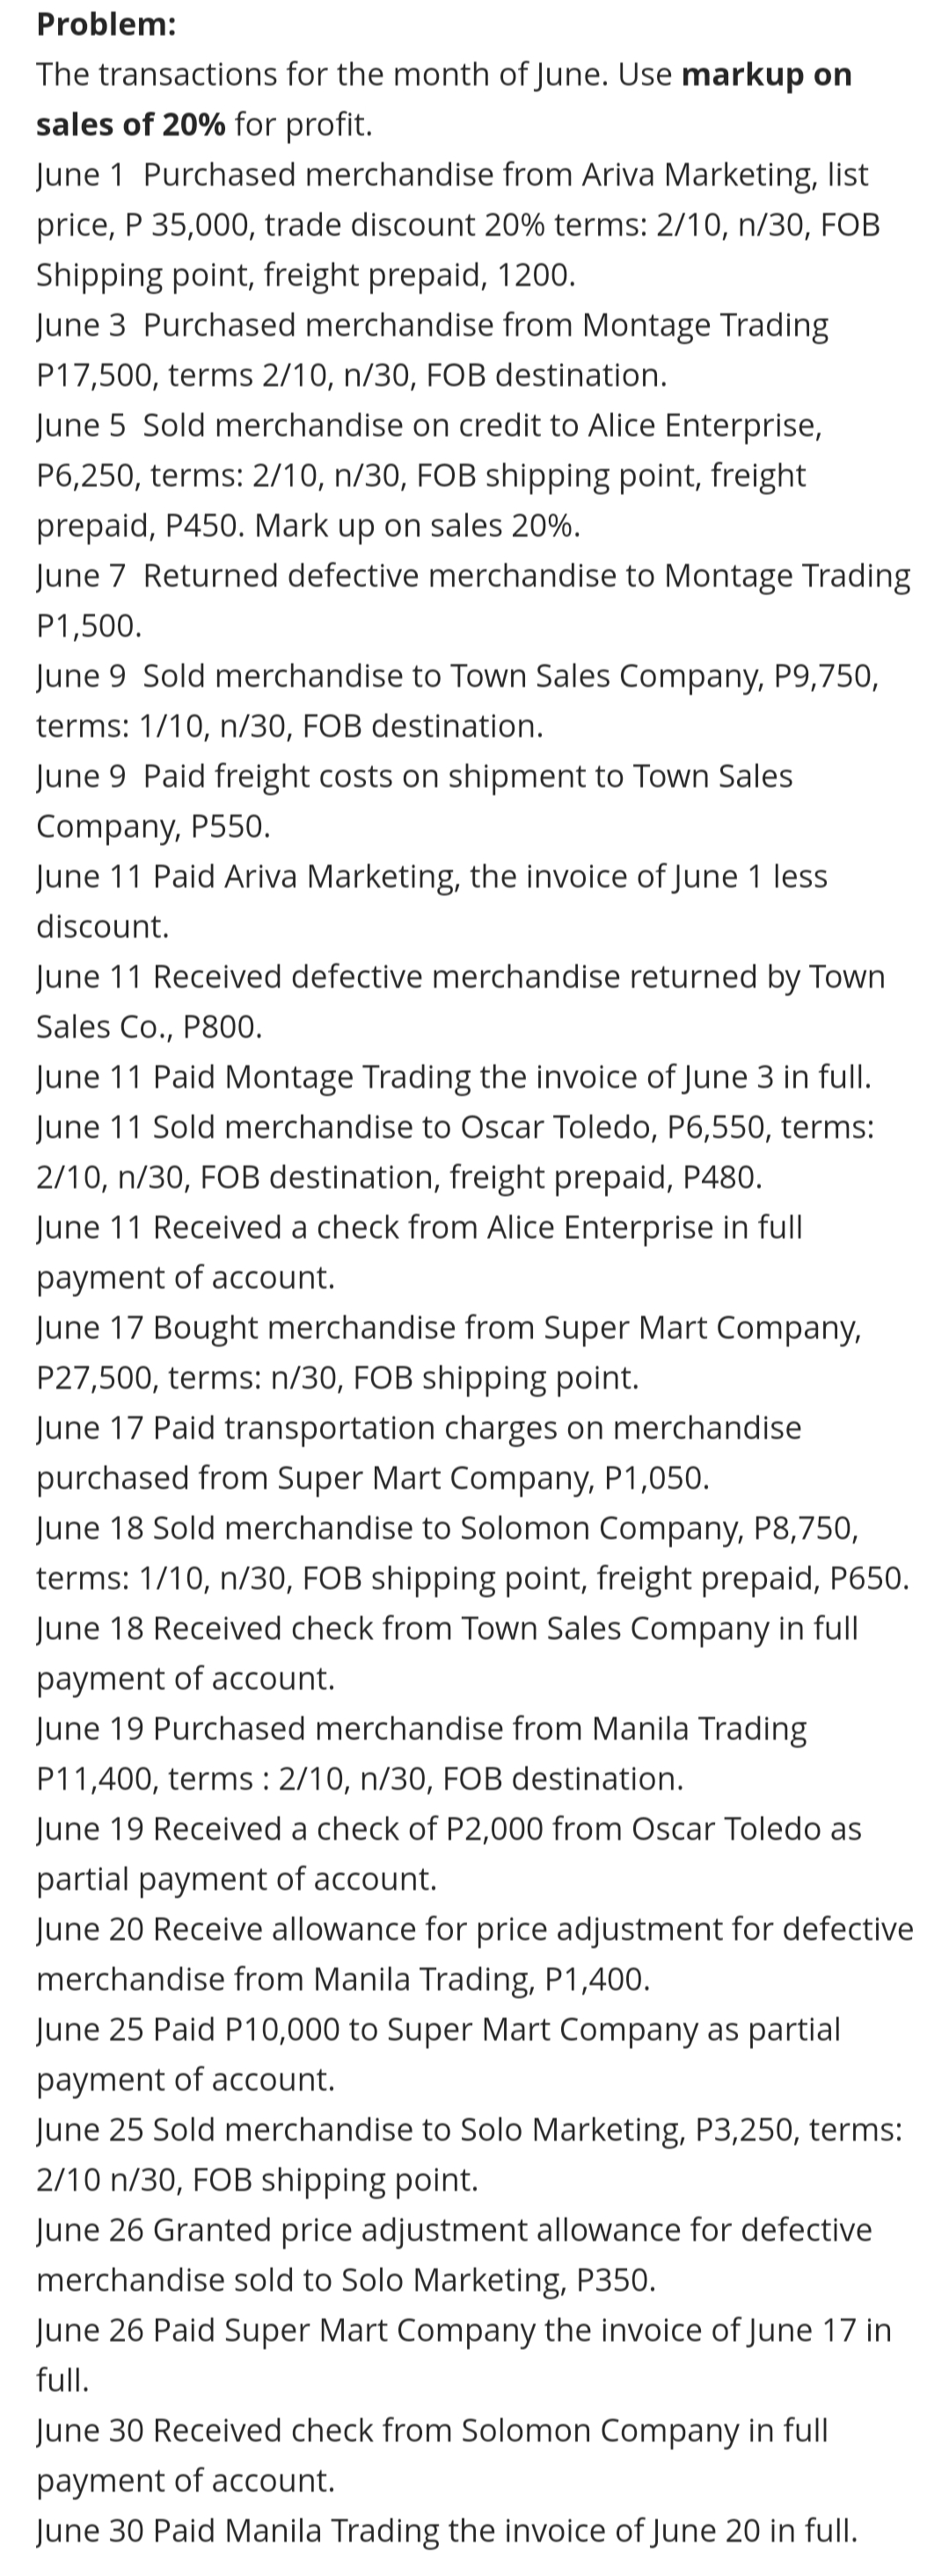 Problem:
The transactions for the month of June. Use markup on
sales of 20% for profit.
June 1 Purchased merchandise from Ariva Marketing, list
price, P 35,000, trade discount 20% terms: 2/10, n/30, FOB
Shipping point, freight prepaid, 1200.
June 3 Purchased merchandise from Montage Trading
P17,500, terms 2/10, n/30, FOB destination.
June 5 Sold merchandise on credit to Alice Enterprise,
P6,250, terms: 2/10, n/30, FOB shipping point, freight
prepaid, P450. Mark up on sales 20%.
June 7 Returned defective merchandise to Montage Trading
P1,500.
June 9 Sold merchandise to Town Sales Company, P9,750,
terms: 1/10, n/30, FOB destination.
June 9 Paid freight costs on shipment to Town Sales
Company, P550.
June 11 Paid Ariva Marketing, the invoice of June 1 less
discount.
June 11 Received defective merchandise returned by Town
Sales Co., P800.
June 11 Paid Montage Trading the invoice of June 3 in full.
June 11 Sold merchandise to Oscar Toledo, P6,550, terms:
2/10, n/30, FOB destination, freight prepaid, P480.
June 11 Received a check from Alice Enterprise in full
payment of account.
June 17 Bought merchandise from Super Mart Company,
P27,500, terms: n/30, FOB shipping point.
June 17 Paid transportation charges on merchandise
purchased from Super Mart Company, P1,050.
June 18 Sold merchandise to Solomon Company, P8,750,
terms: 1/10, n/30, FOB shipping point, freight prepaid, P650.
June 18 Received check from Town Sales Company in full
payment of account.
June 19 Purchased merchandise from Manila Trading
P11,400, terms : 2/10, n/30, FOB destination.
June 19 Received a check of P2,000 from Oscar Toledo as
partial payment of account.
June 20 Receive allowance for price adjustment for defective
merchandise from Manila Trading, P1,400.
June 25 Paid P10,000 to Super Mart Company as partial
payment of account.
June 25 Sold merchandise to Solo Marketing, P3,250, terms:
2/10 n/30, FOB shipping point.
June 26 Granted price adjustment allowance for defective
merchandise sold to Solo Marketing, P350.
June 26 Paid Super Mart Company the invoice of June 17 in
full.
June 30 Received check from Solomon Company in full
payment of account.
June 30 Paid Manila Trading the invoice of June 20 in full.
